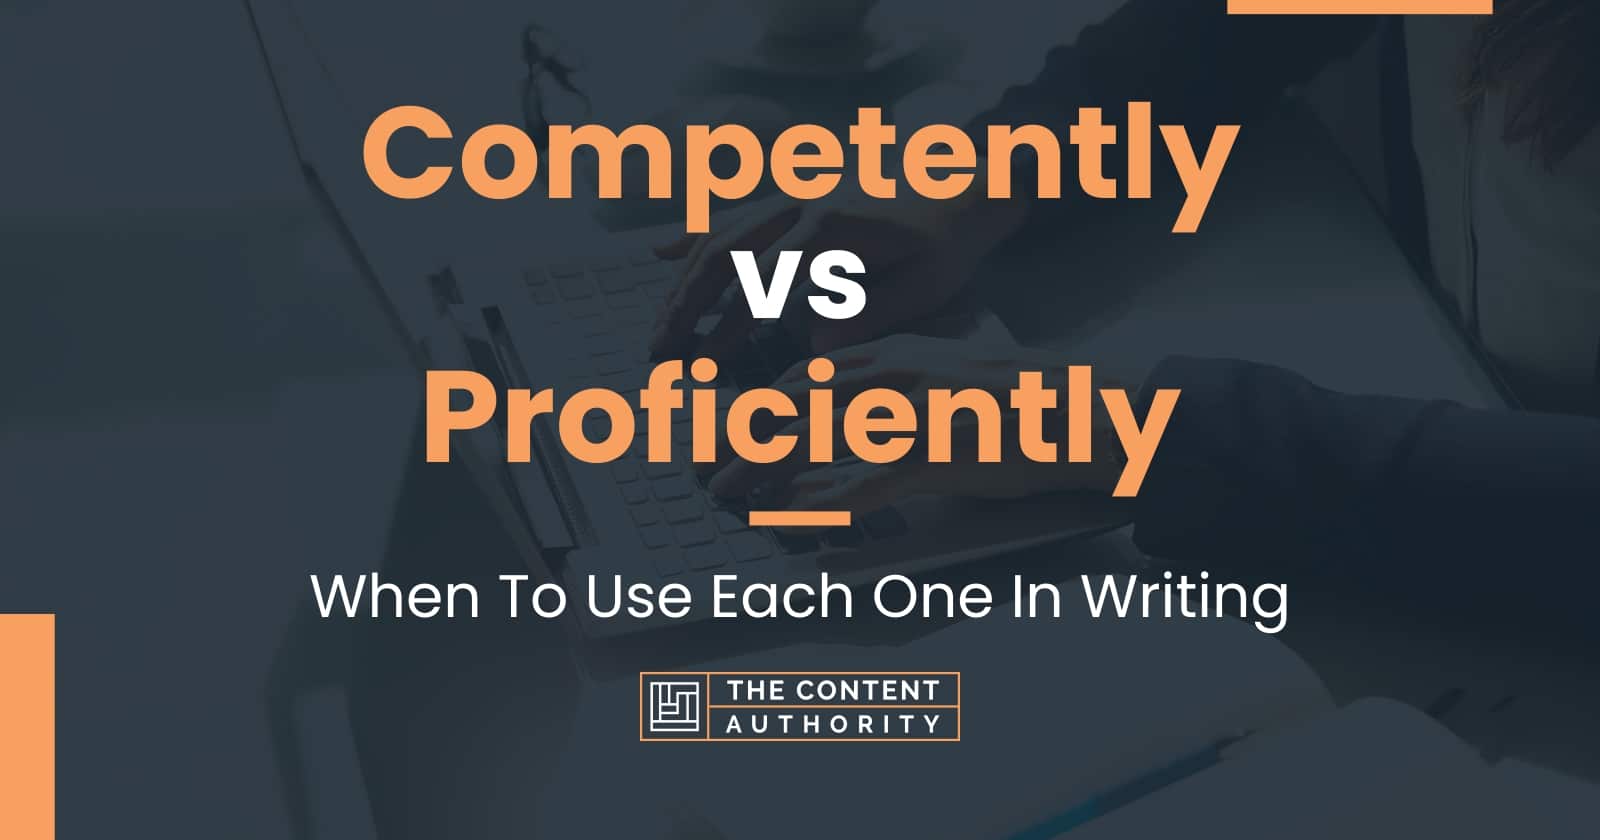 Competently vs Proficiently: When To Use Each One In Writing